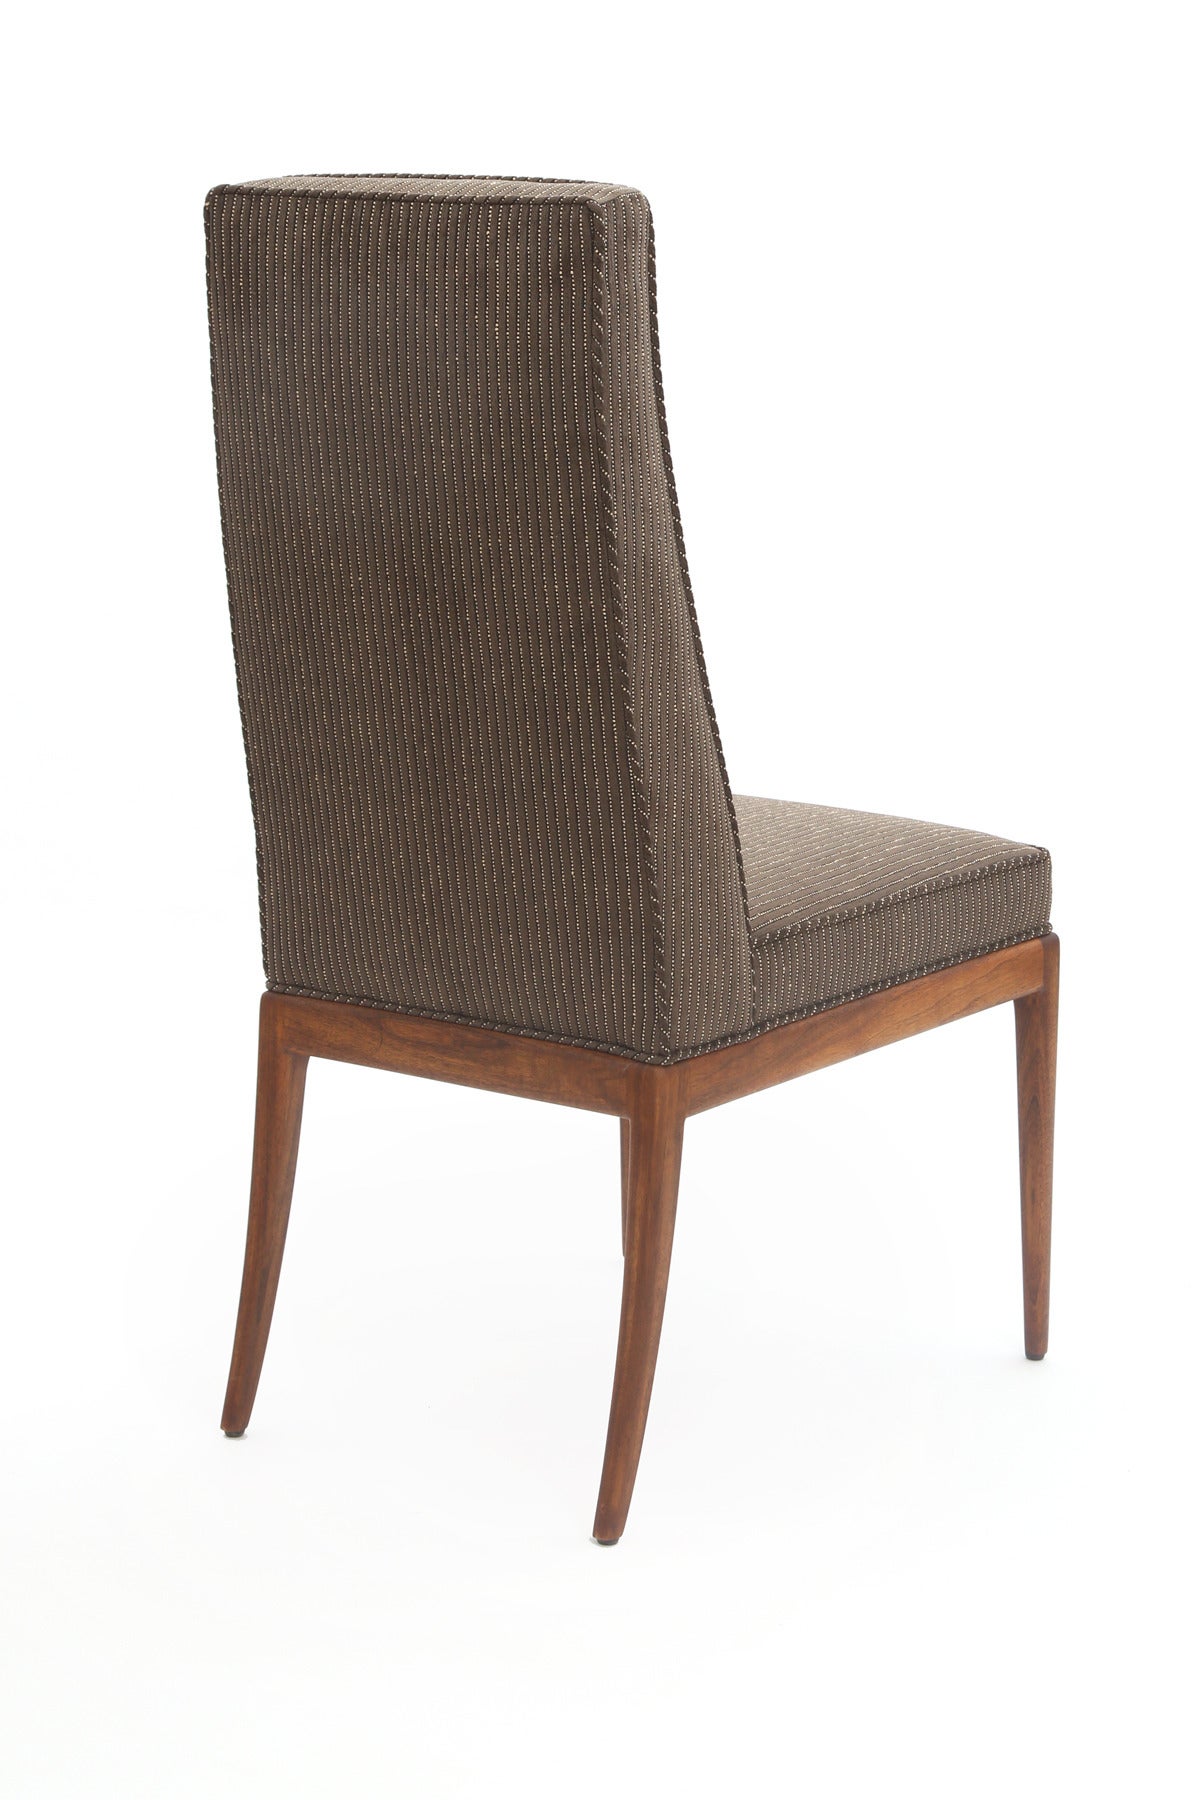 American Six Saber Leg Mahogany and Upholstered Dining Chairs